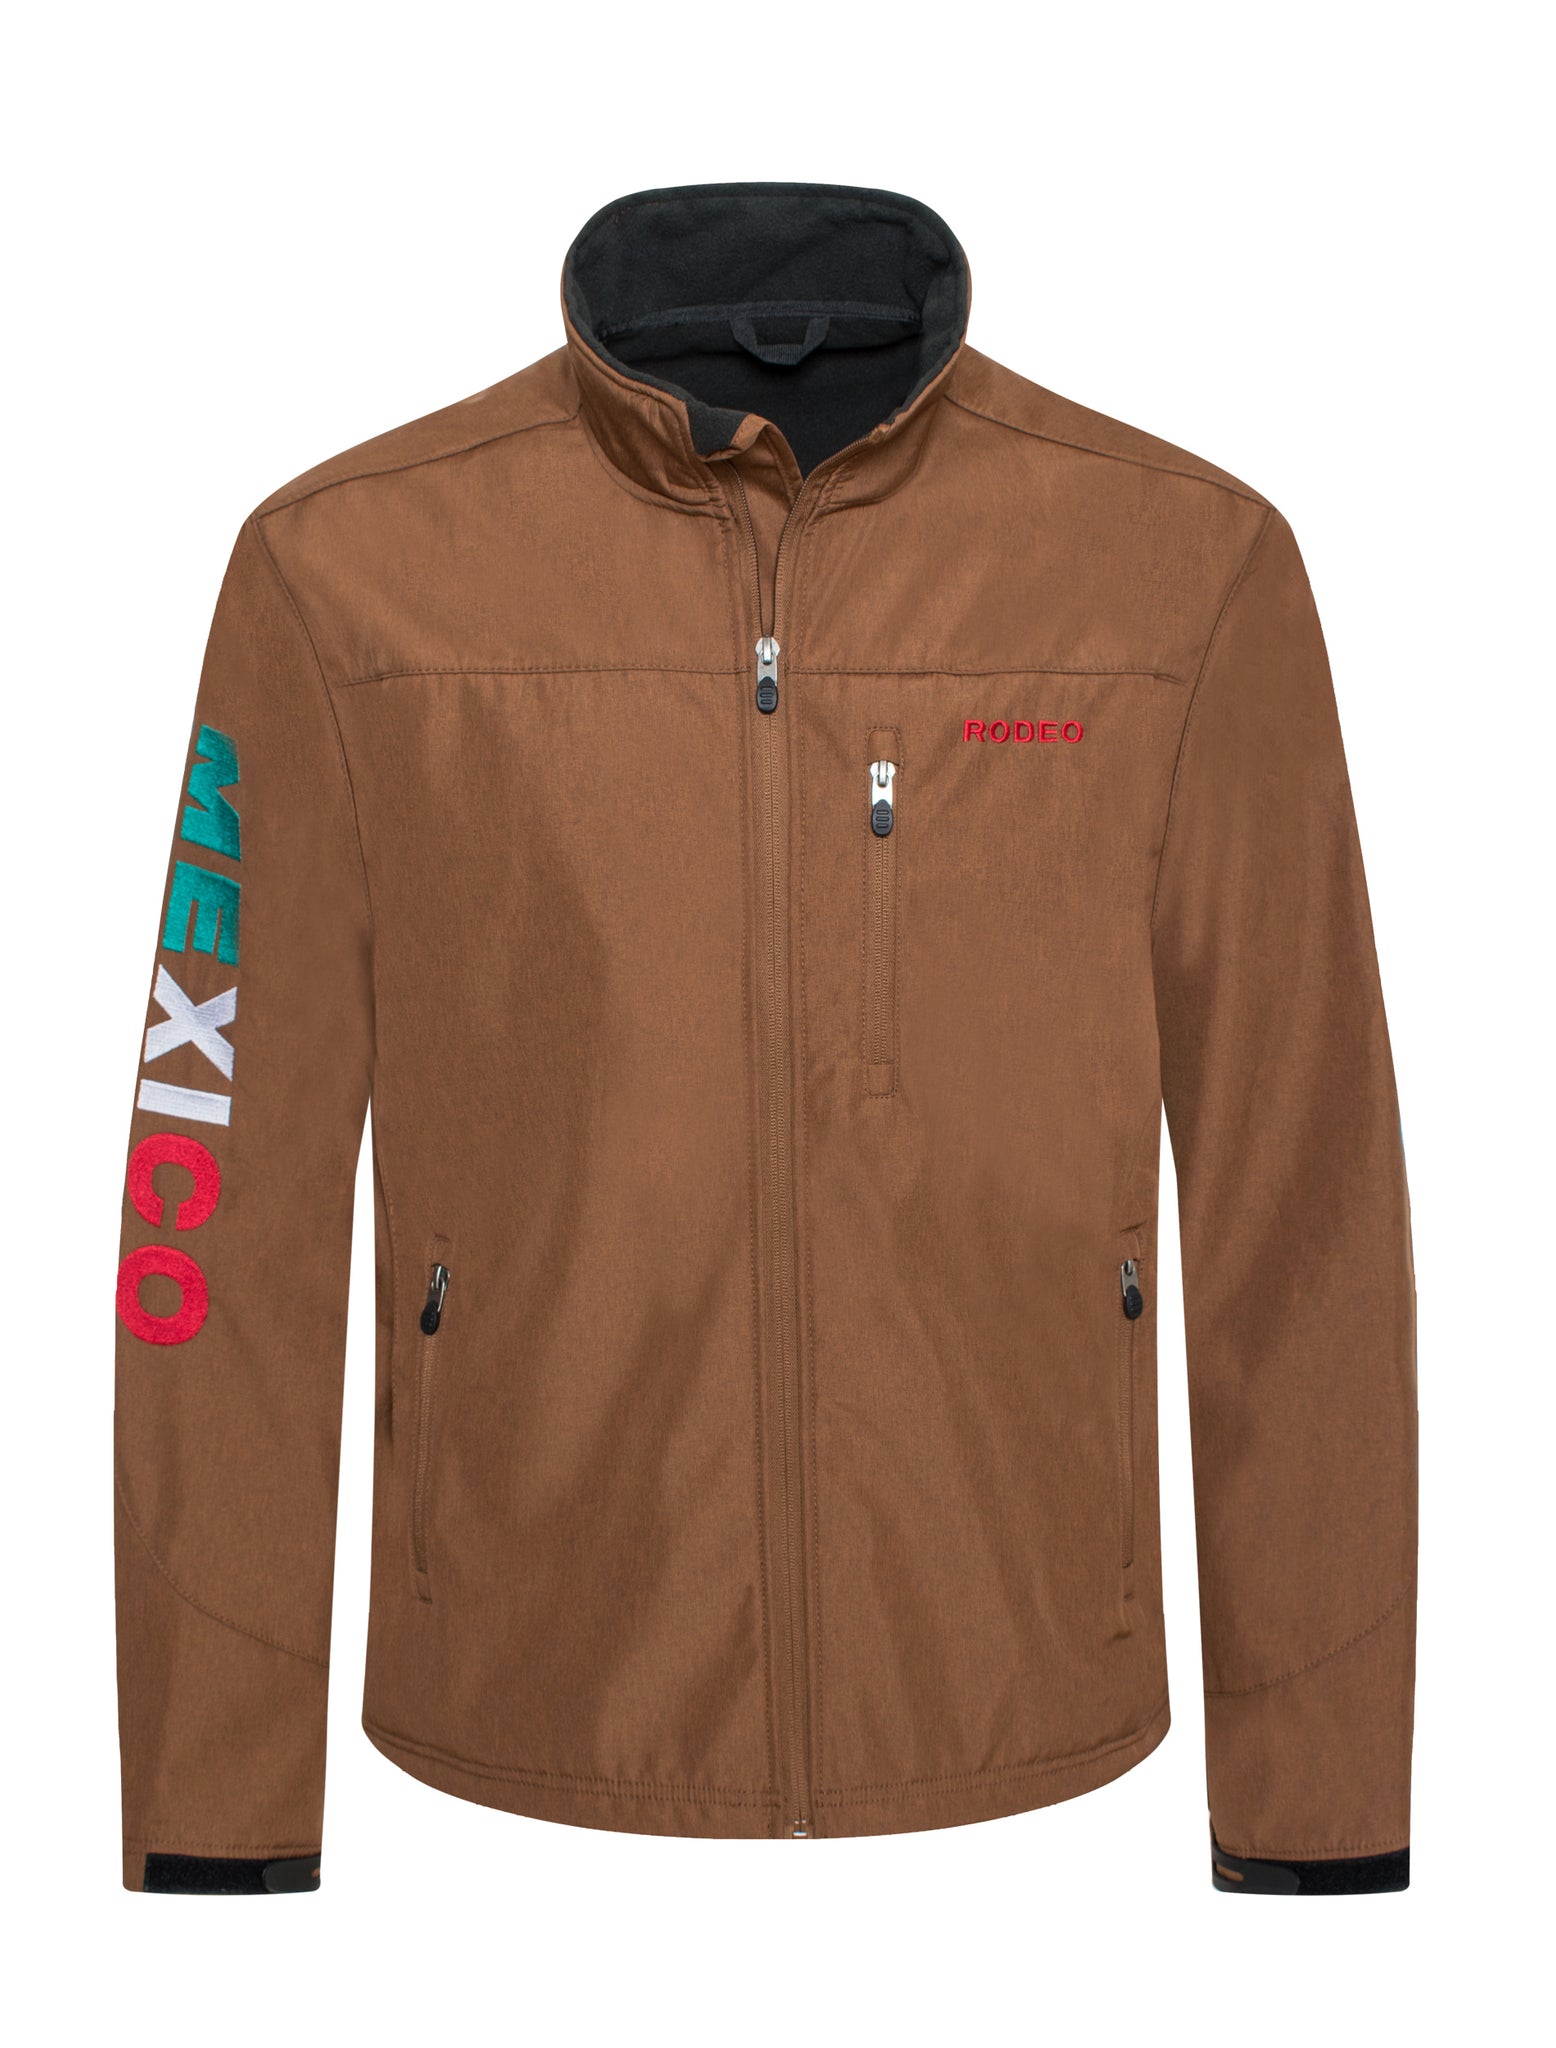 Men's Soft Shell Bonded Jacket With Rodeo Embroidery